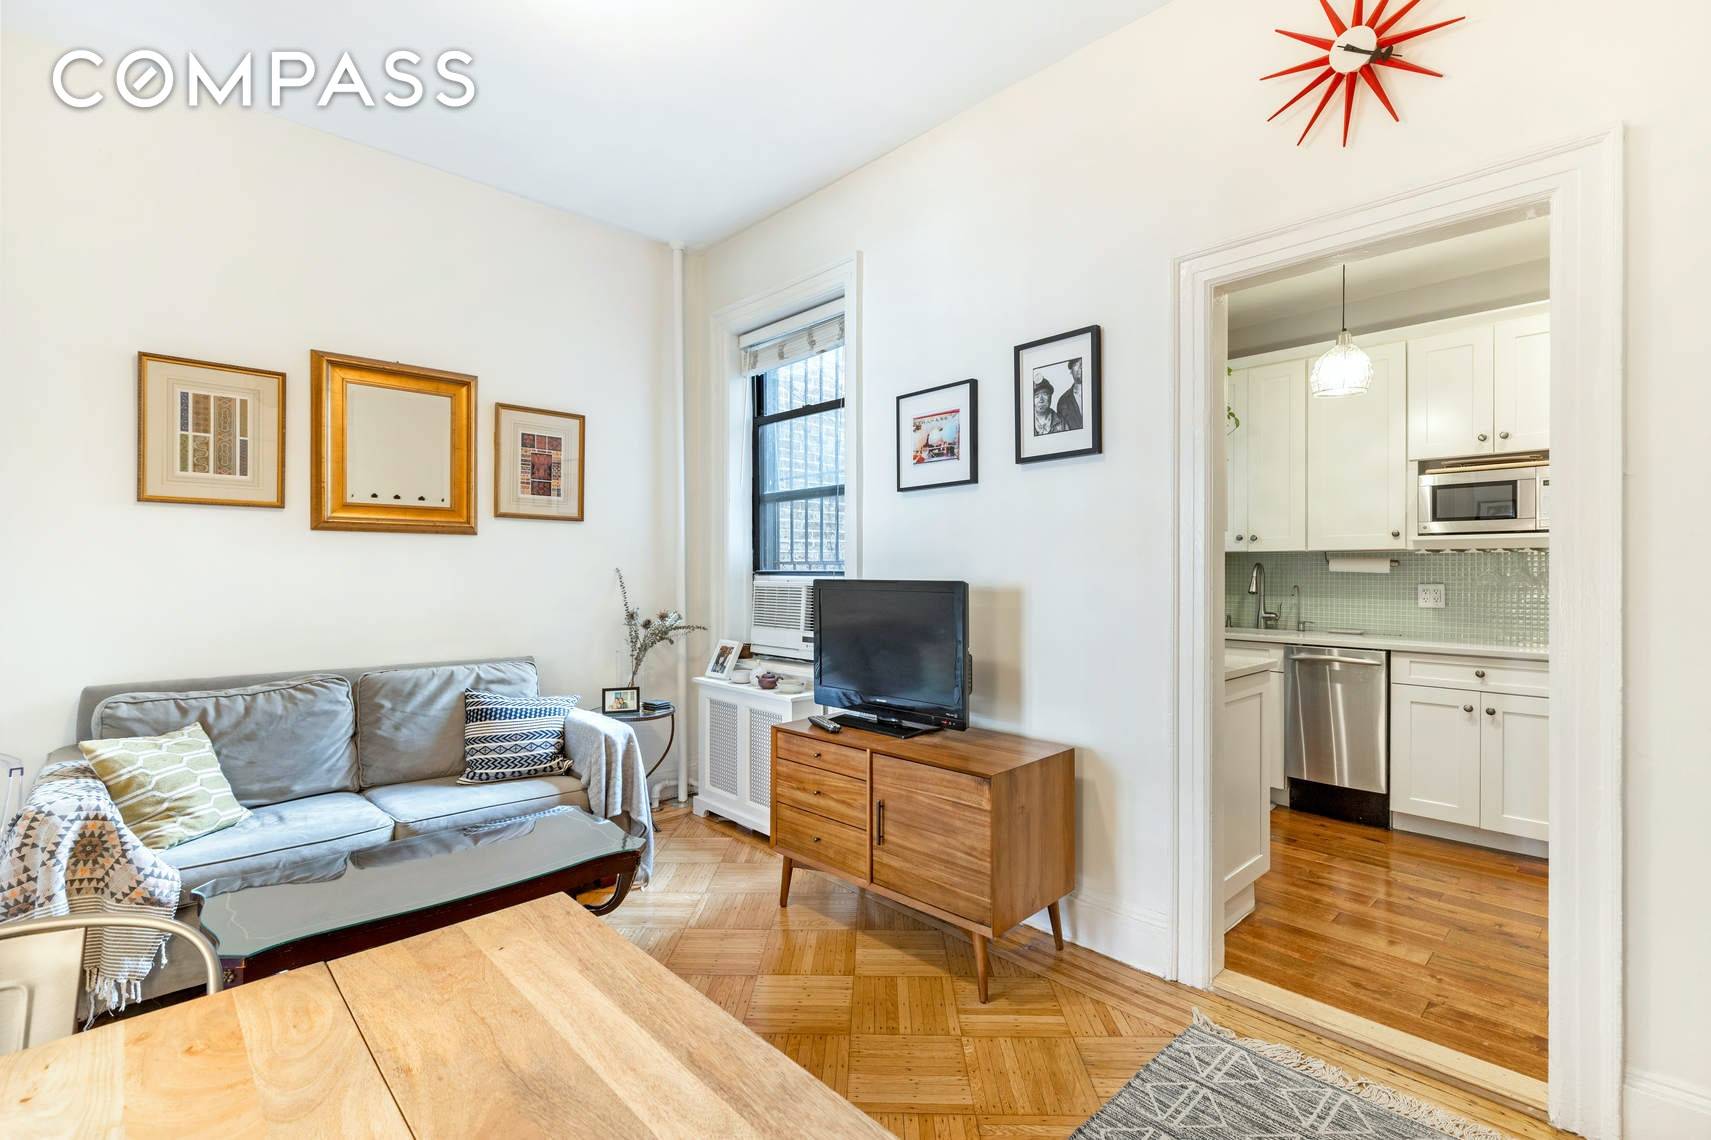 An unheard of value on one of Boerum Hill's most coveted blocks, this recently renovated, sun splashed, 1 bedroom, 1 bathroom co op apartment is both charming and in excellent ...